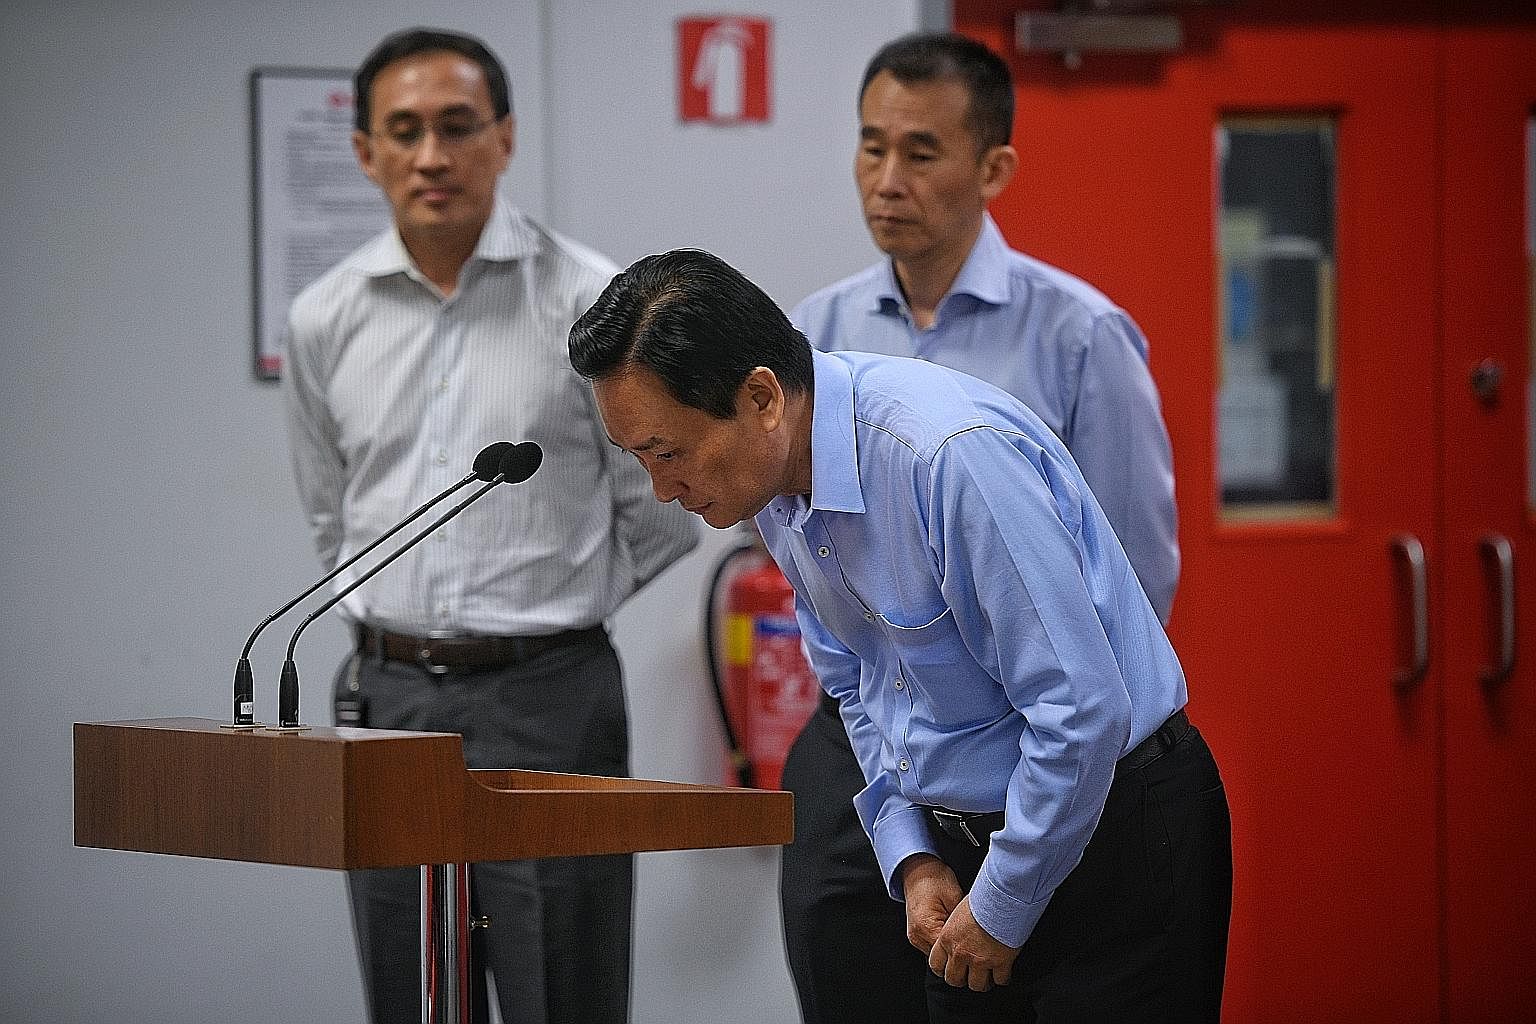 SMRT chairman Seah Moon Ming, flanked by Mr Desmond Kuek (left) and Mr Lee Ling Wee, bowing in apology during the media briefing on Oct 16.